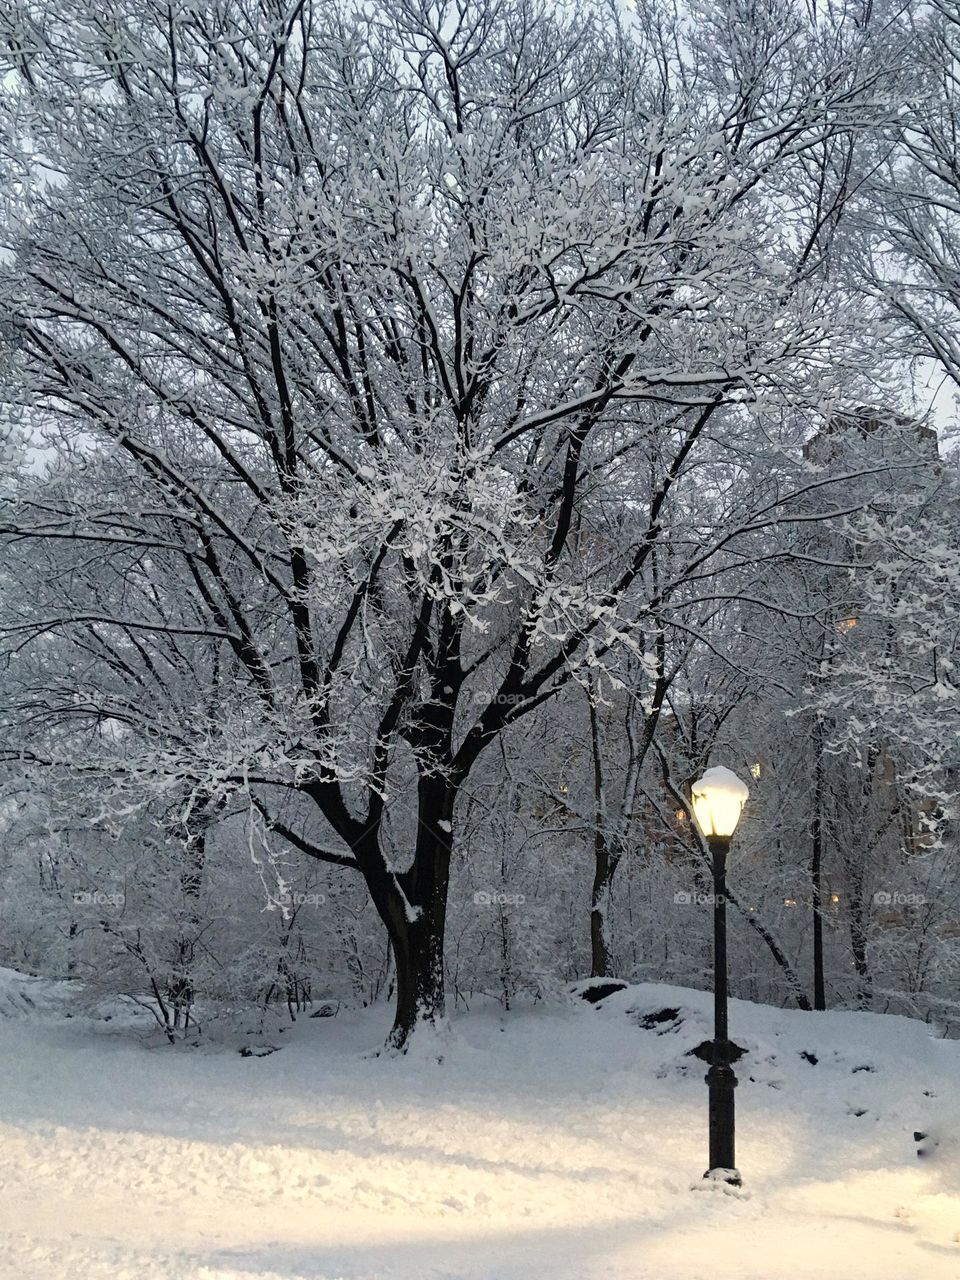 Trees full of snow and the lamp post.